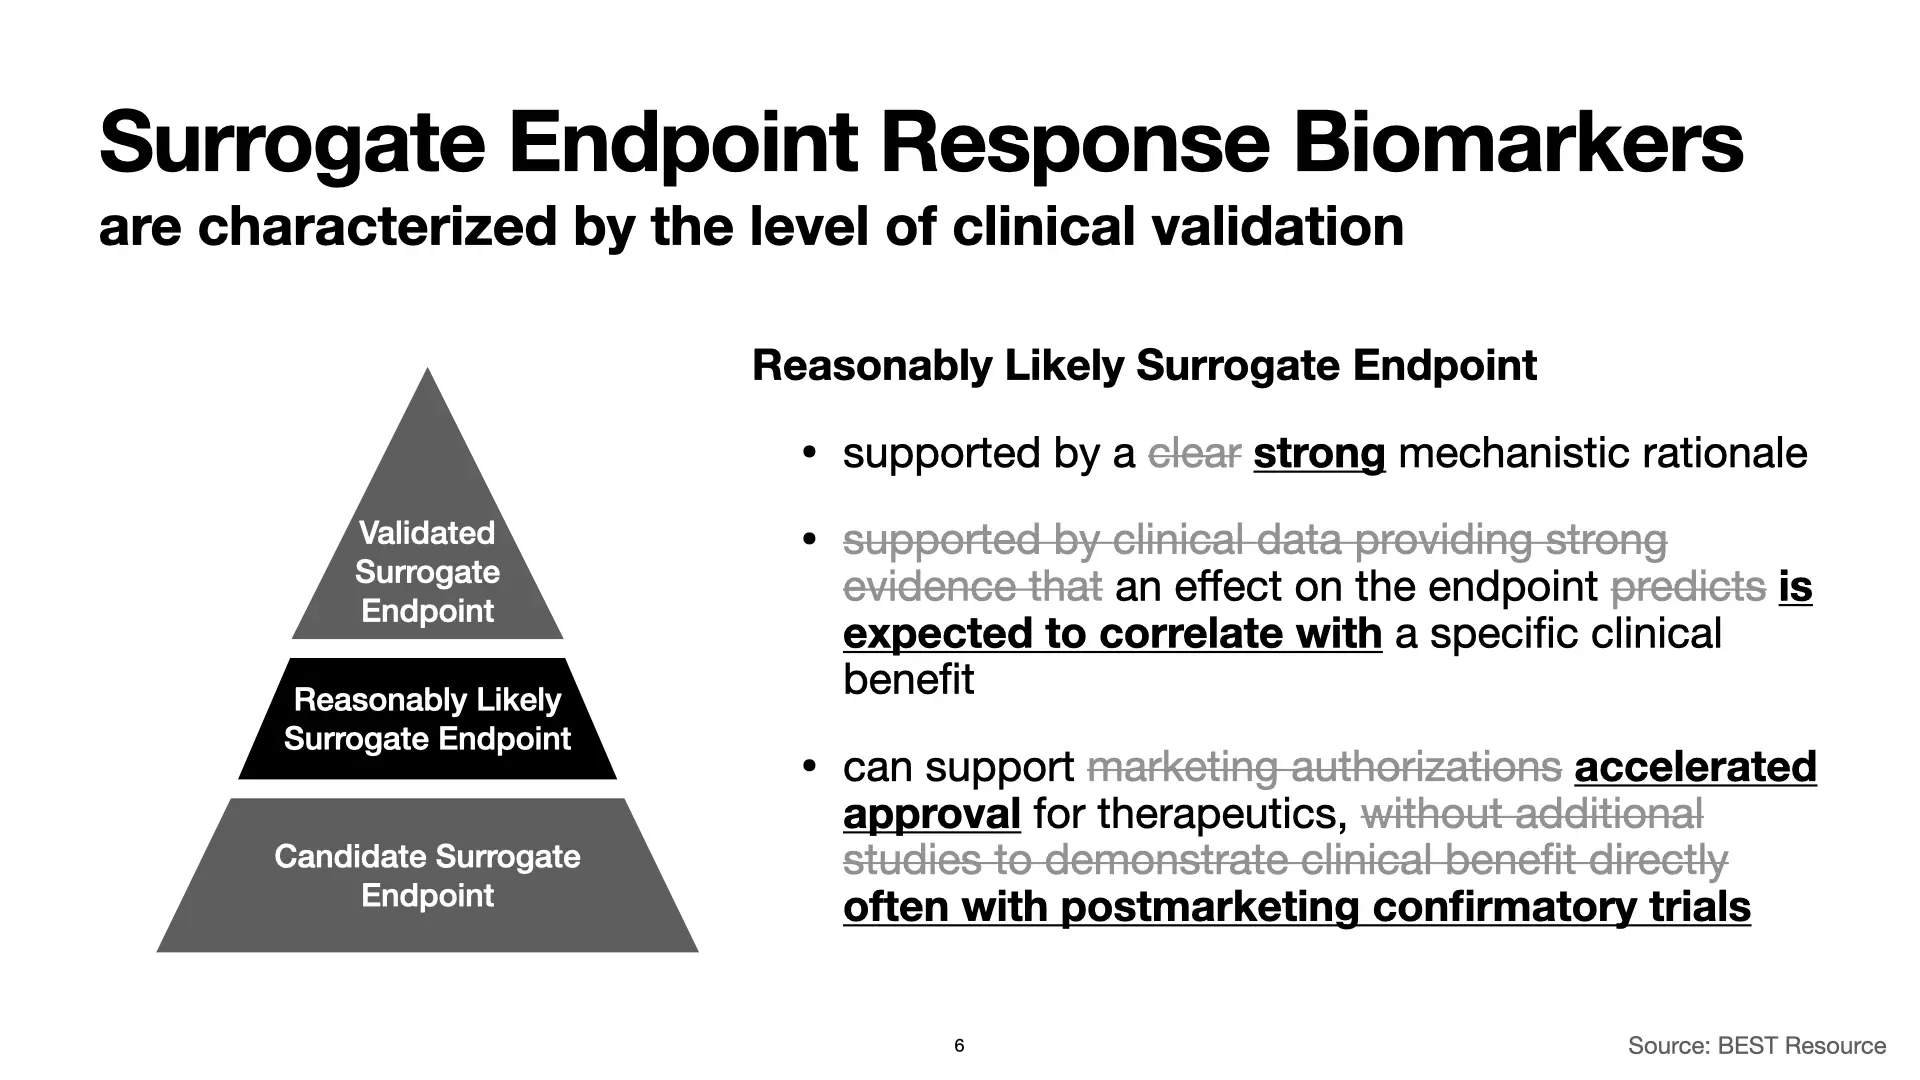 Slide 6: Surrogate Endpoint Response Biomarkers are characterized by the level of clinical validation. The pyramid graphic appears again, with 'Validated Surrogate Endpoint' highlighted. A 'tracked changes' style is used to compare and contrast Reasonably Likely Surrogate Endpoints with Validated Surrogate Endpoints. A Reasonably Likely Surrogate Endpoint has a strong mechanistic rationale (as opposed to a clear mechanistic rationale for Validated Surrogate Endpoints), an effect on the endpoint is expected to correlate with a specific clinical benefit (as opposed to an expectation that it will predict that endpoint based on clinical data that provides strong evidence for Validated Surrogate Endpoints), and can support accelerated approval for therapeutics, often with postmarketing confirmatory trials (as opposed to supporting marketing authorizations without additional studies to demonstrate clinical benefit directly for Validated Surrogate Endpoints). Source: BEST Resource.